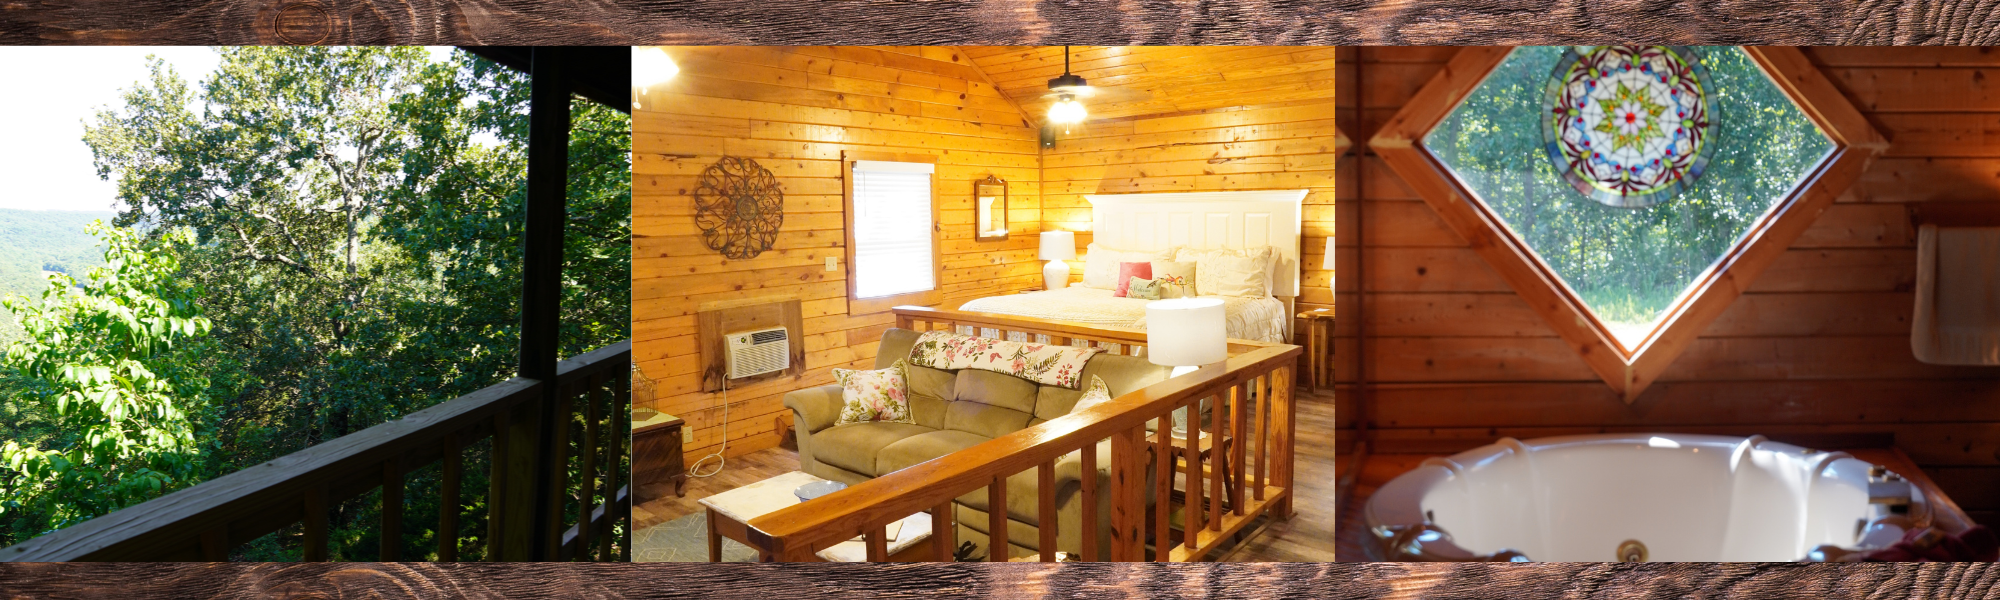 collage featuring back porch, cabin interior and jacuzzi tub 